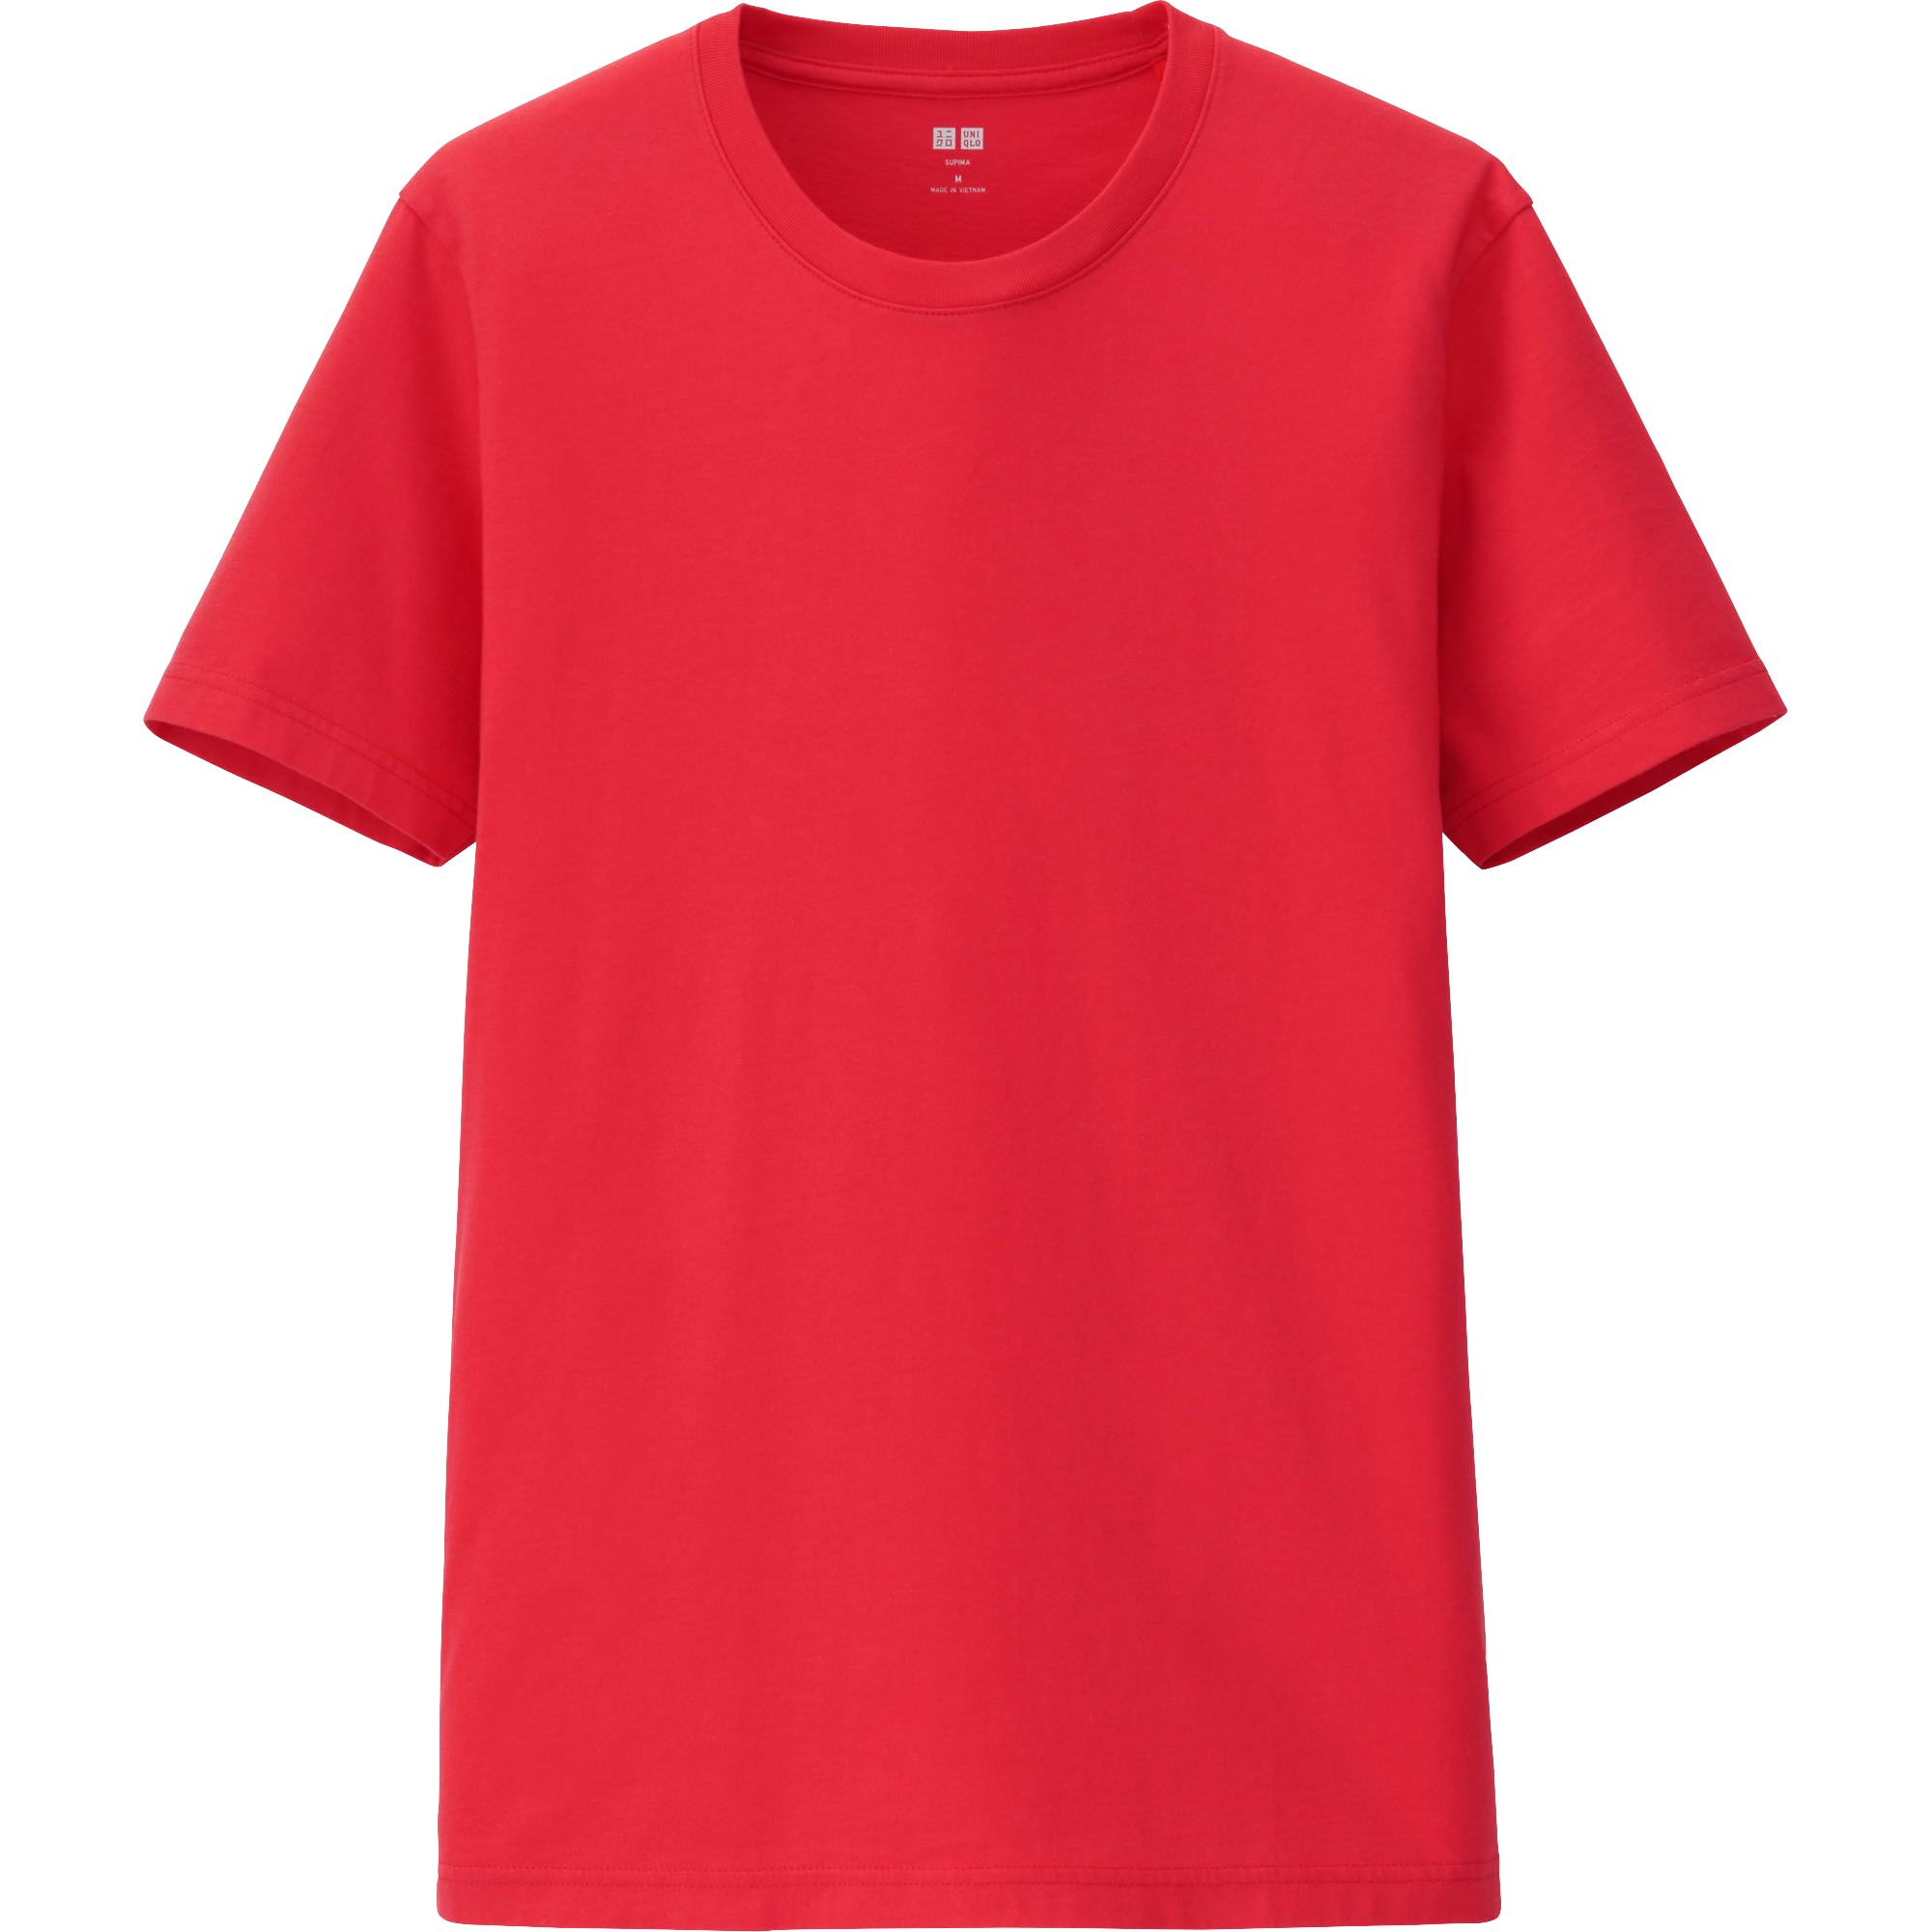 Uniqlo Men Supima Cotton Crew Neck Short Sleeve T-shirt in Red for Men